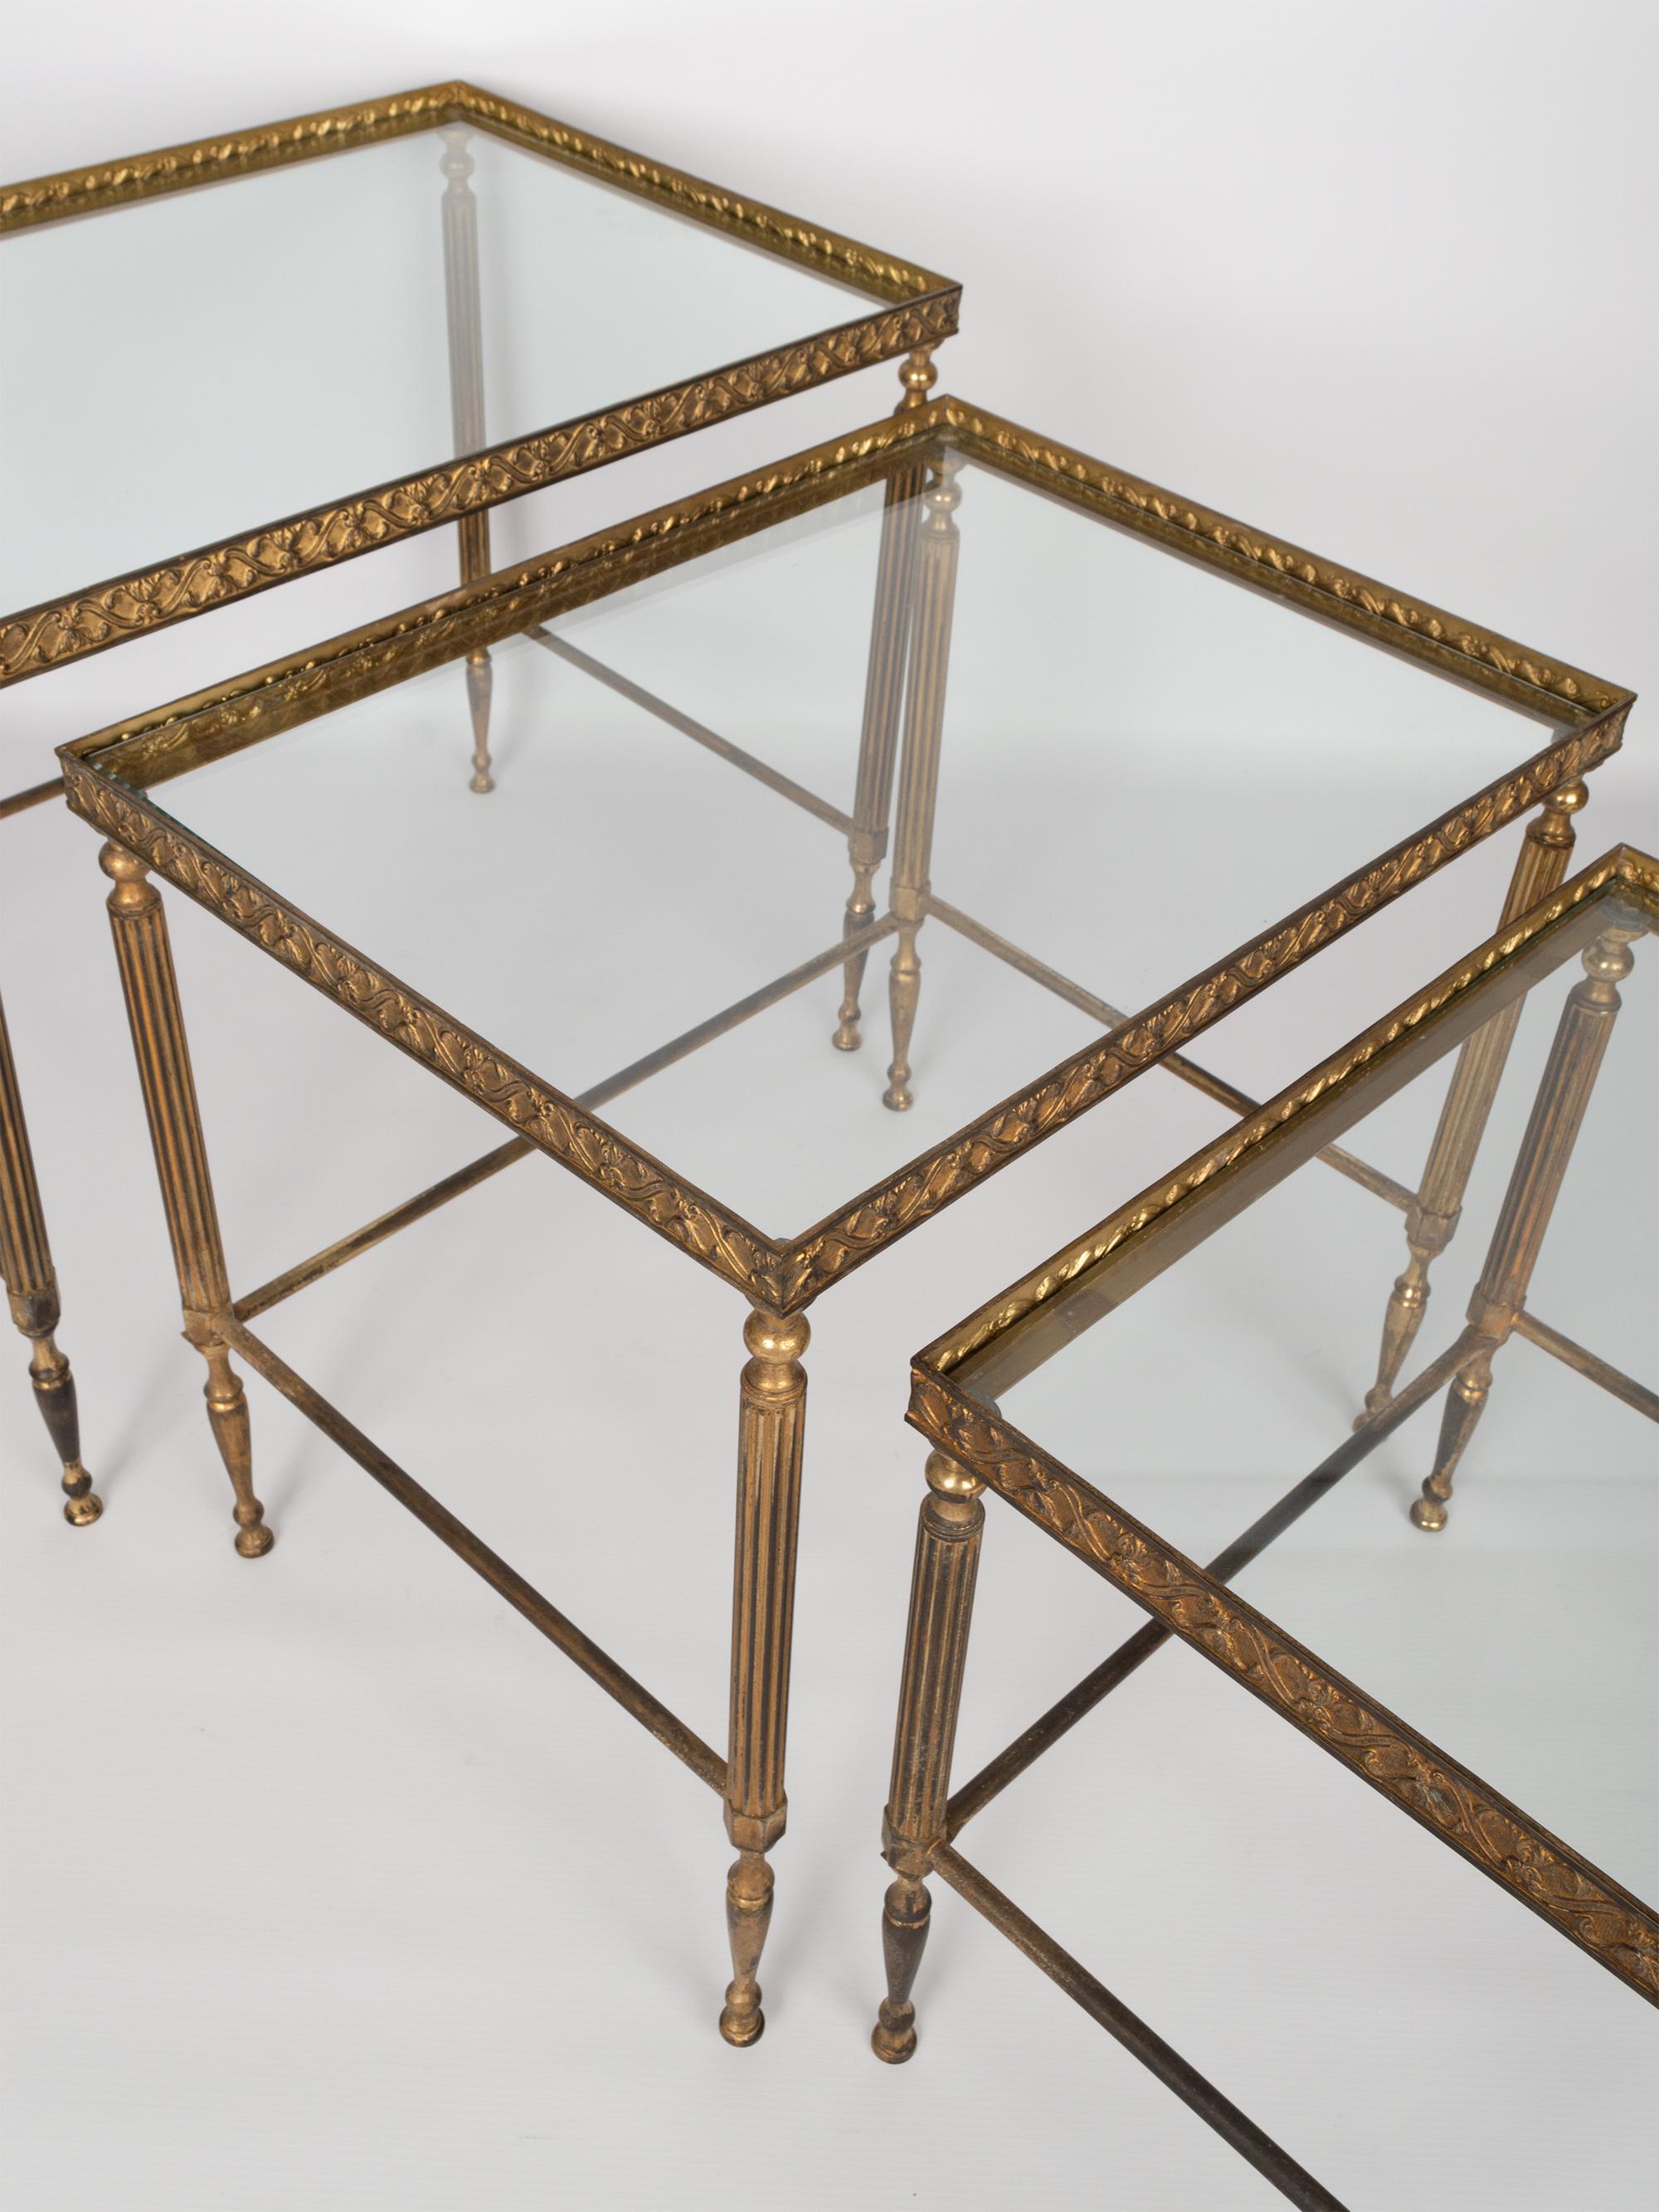 Midcentury Bronze Brass and Glass Nesting Tables by Maison Baguès, France 1